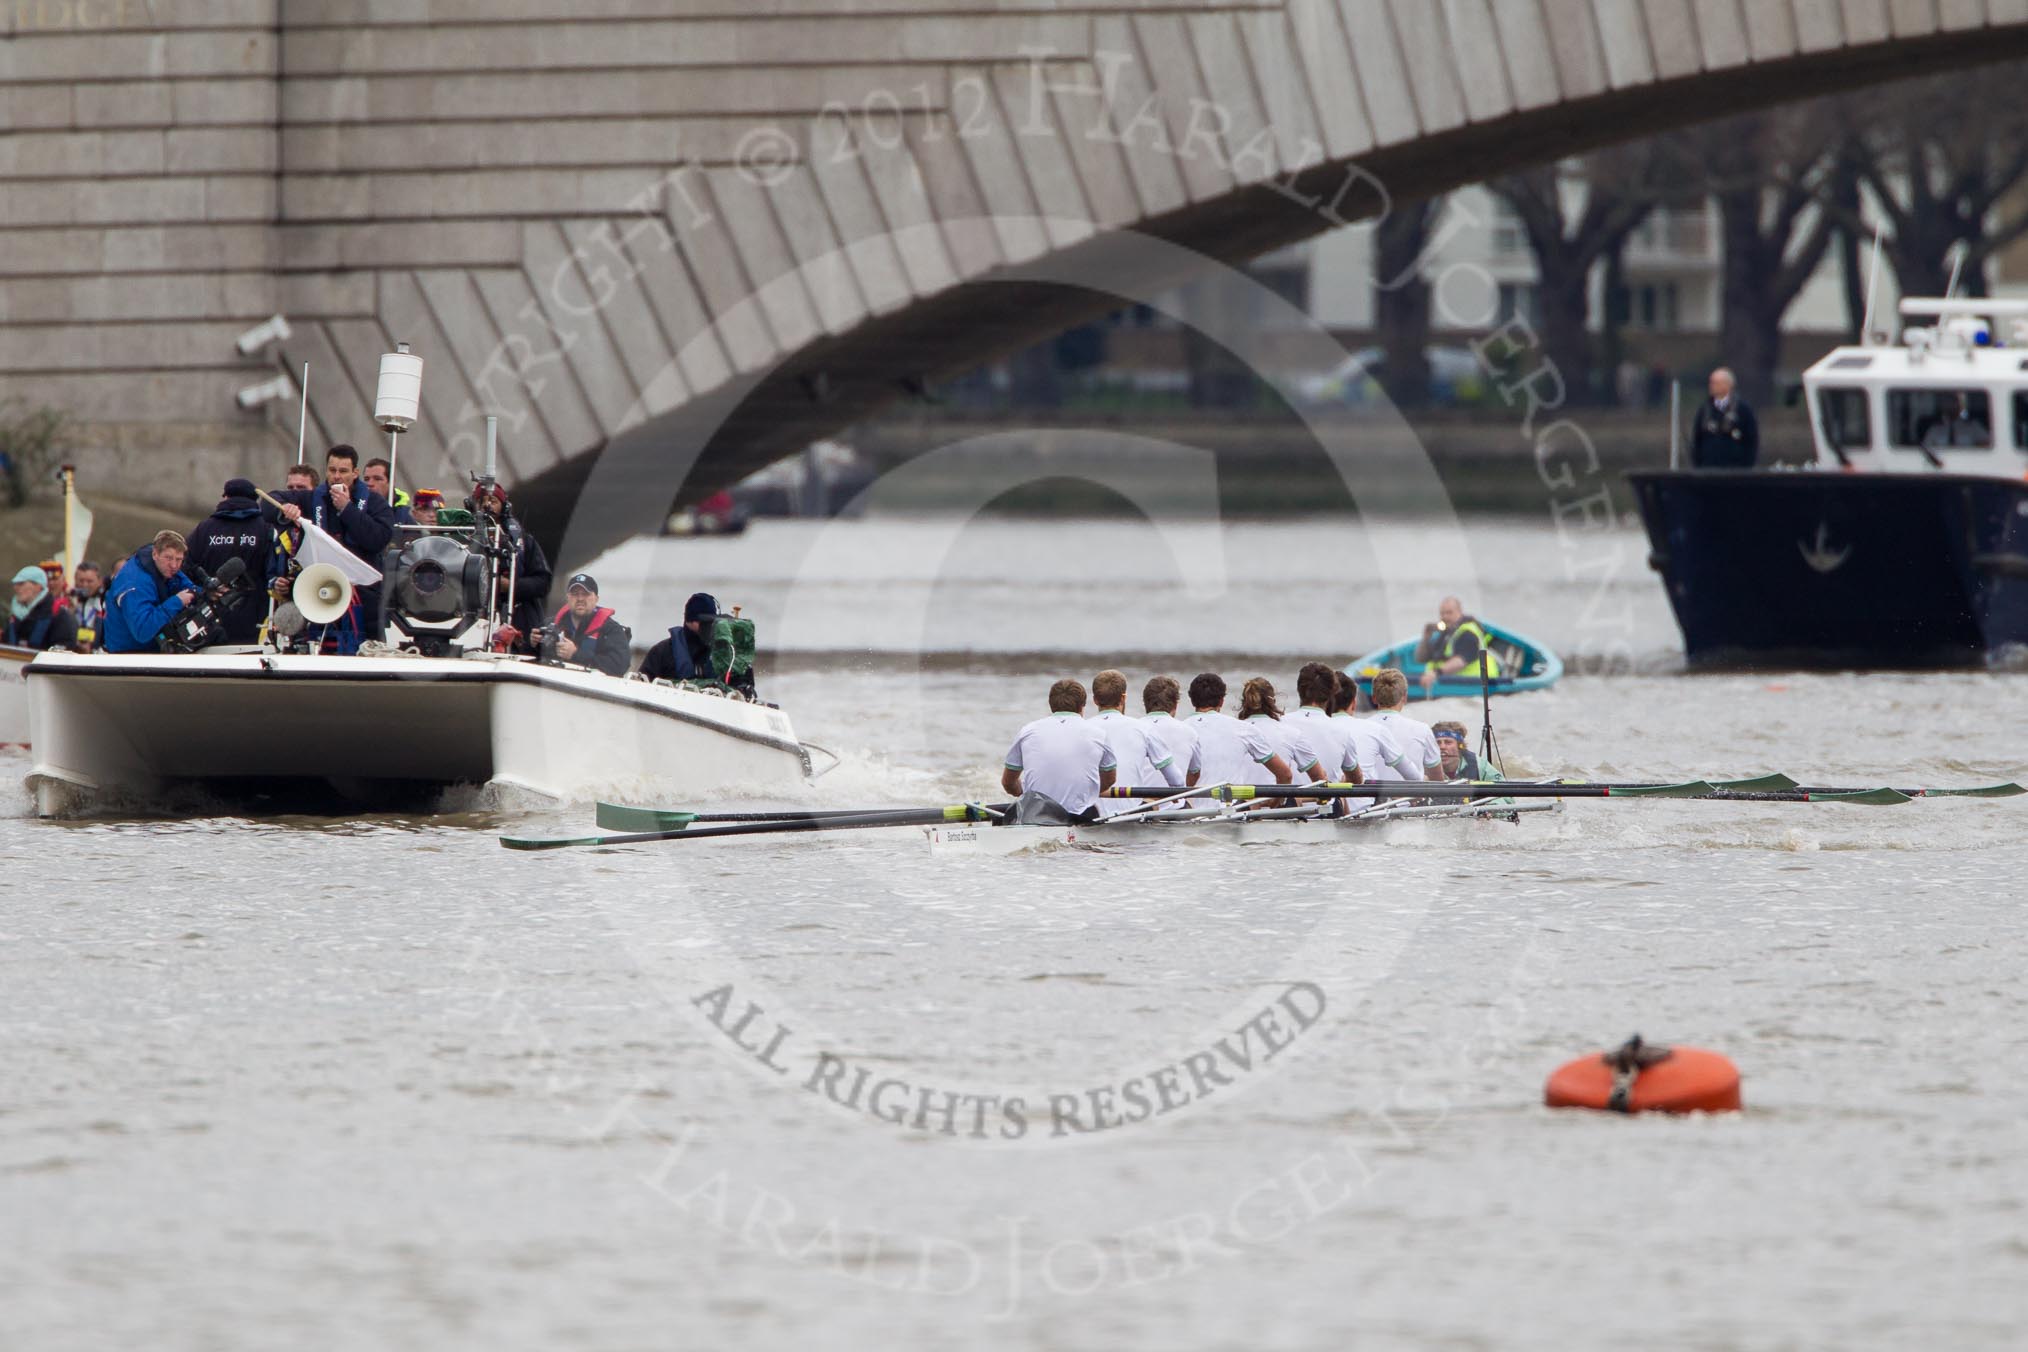 The Boat Race 2012: The start of the 2012 Boat Race. The Cambridge Blue Boat has just been released from the stake boat behind..




on 07 April 2012 at 14:16, image #224